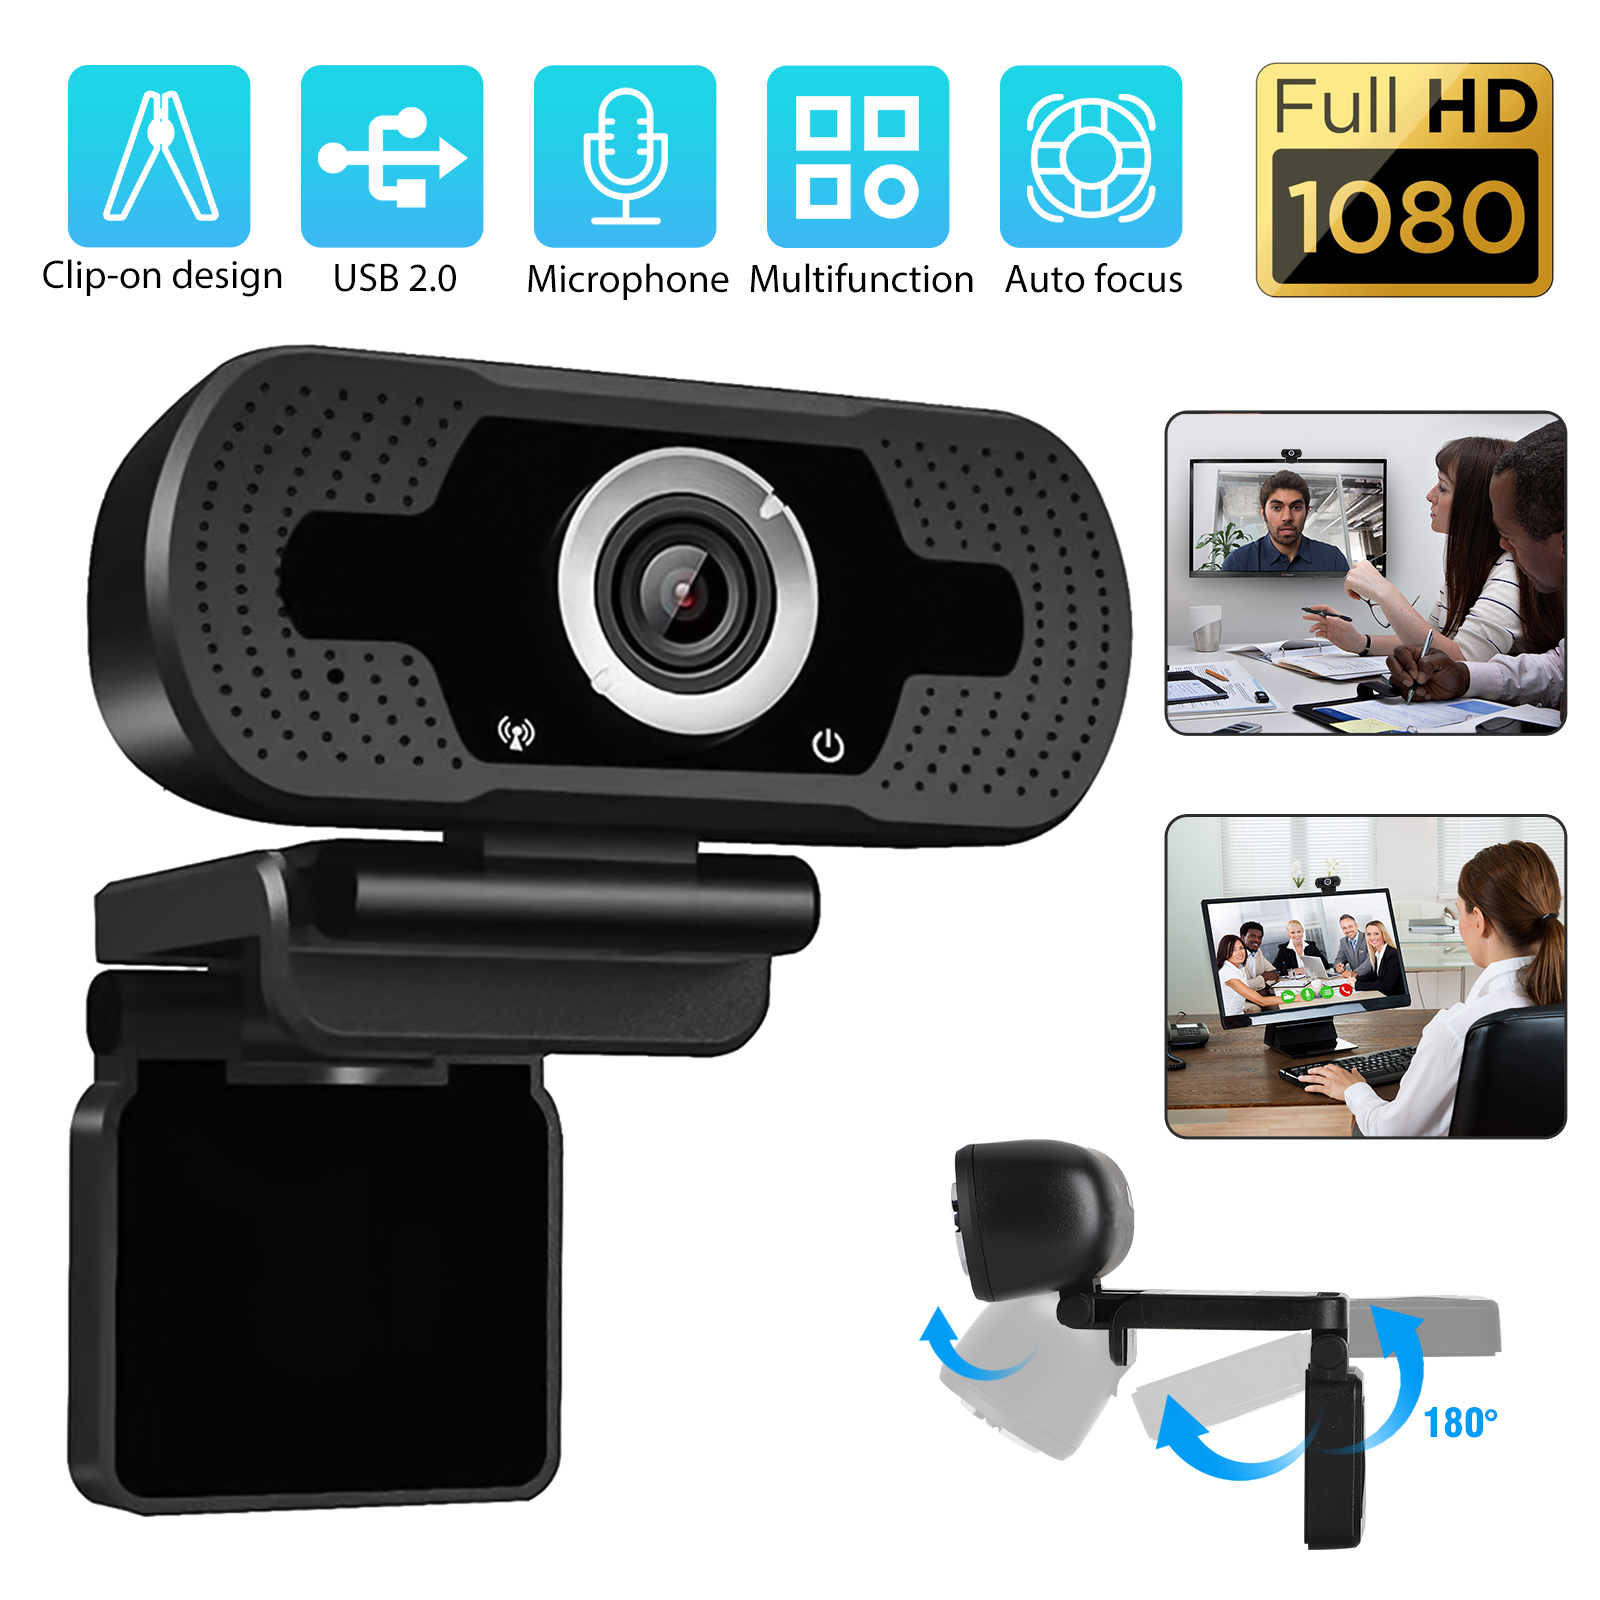 U4-N HD 1080P 110° Wide Angle Auto focus USB Webcam Conference Live Computer Camera Built-in Noise Reduction Microphone for PC Laptop